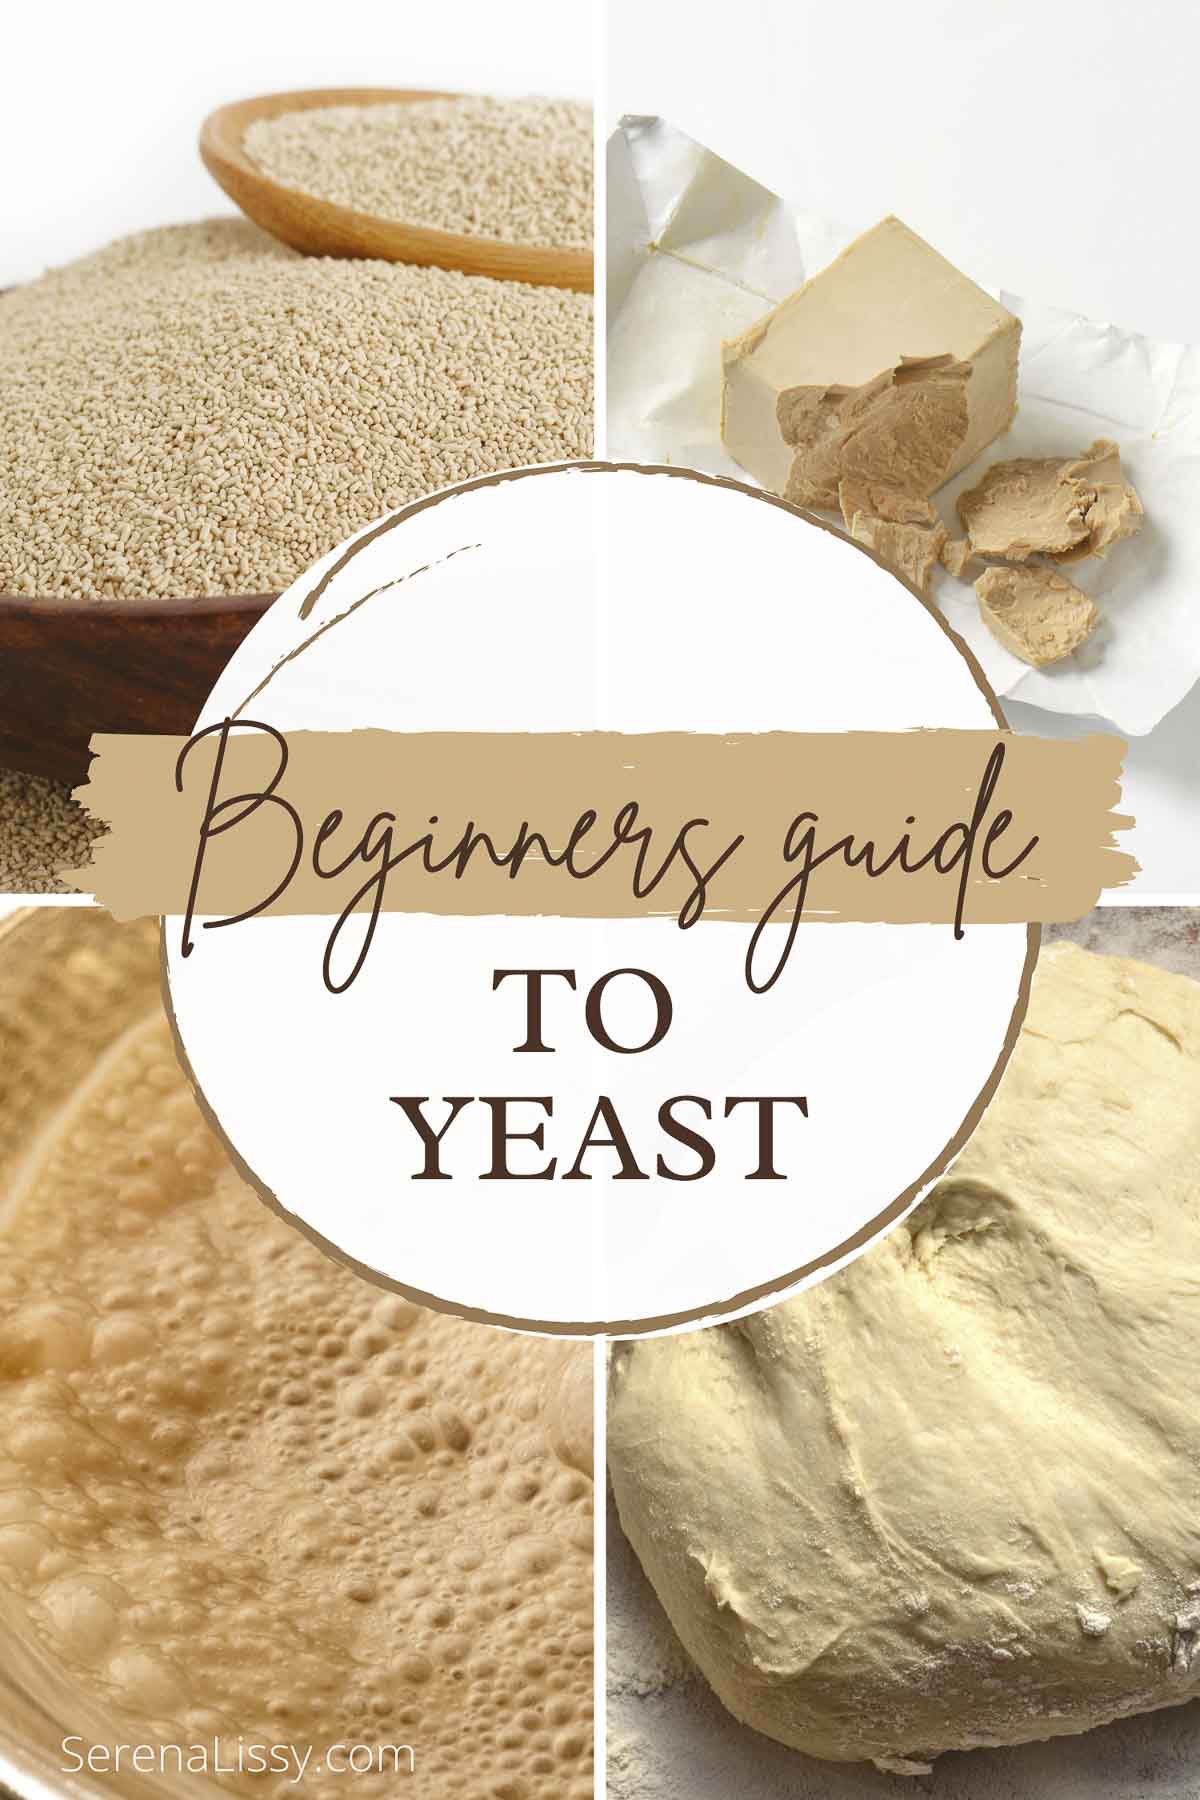 Different types of yeast